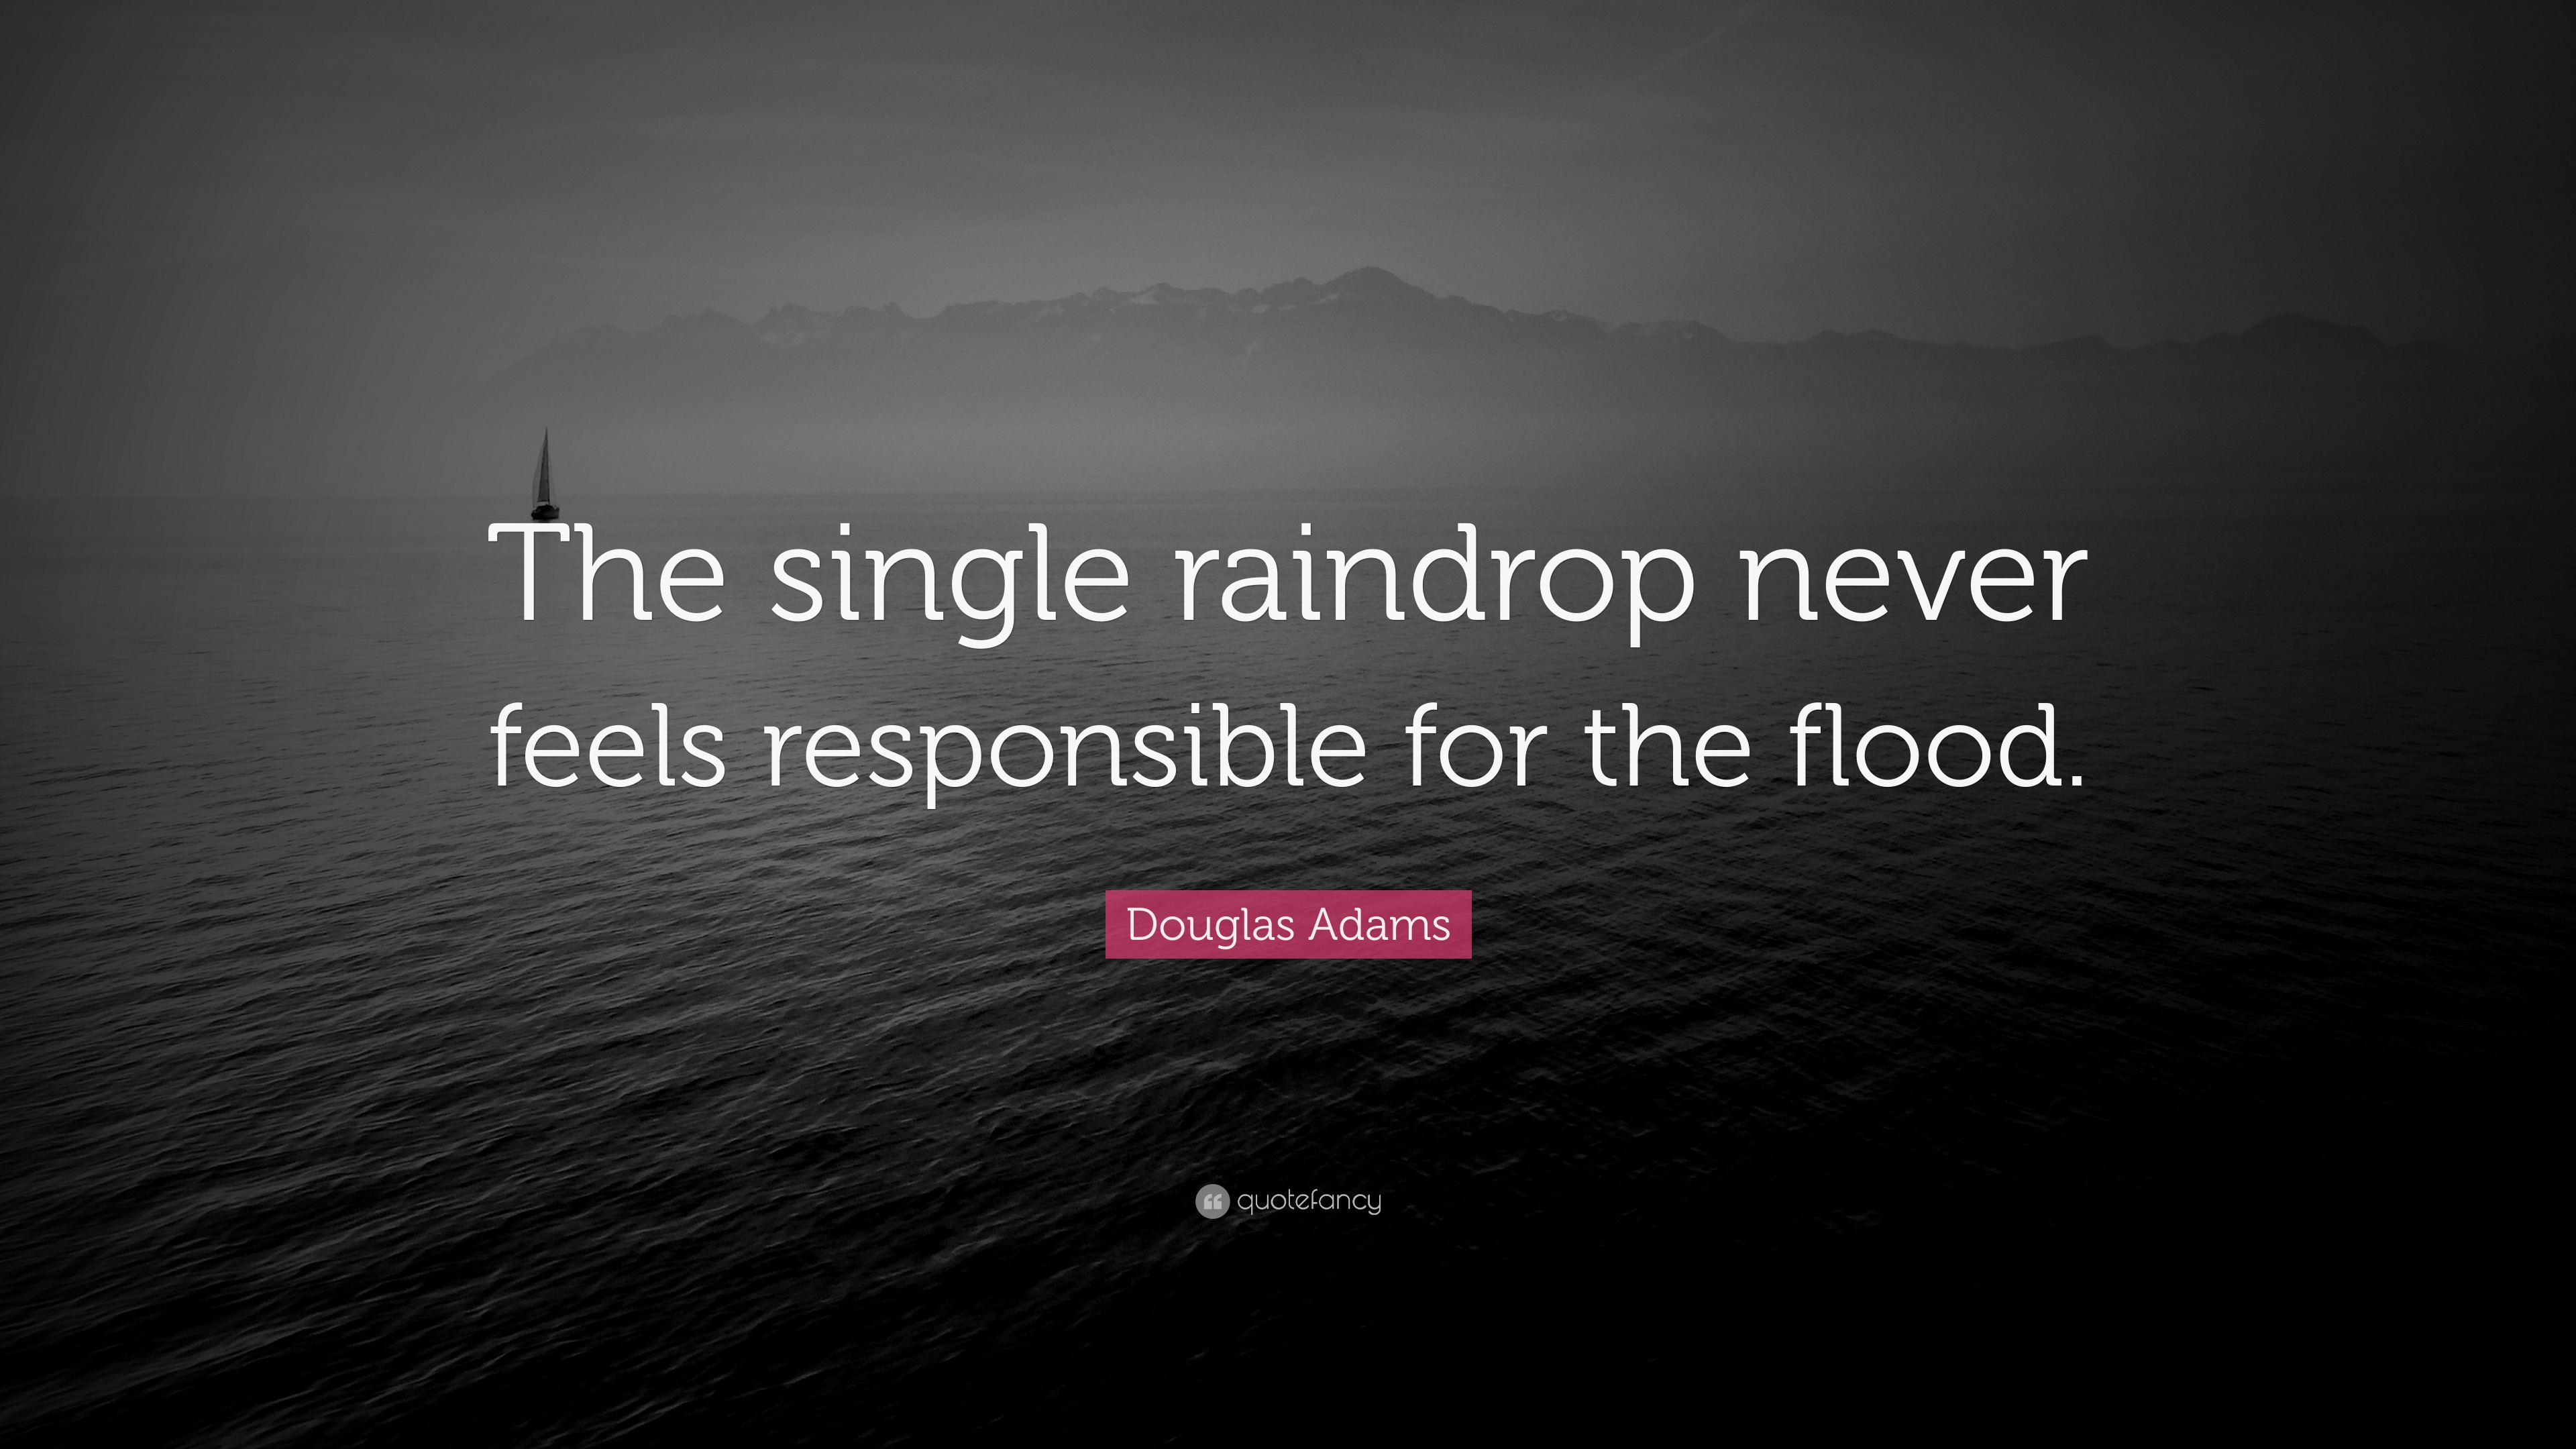 Responsibility no single raindrop believes it is to blame for the flood